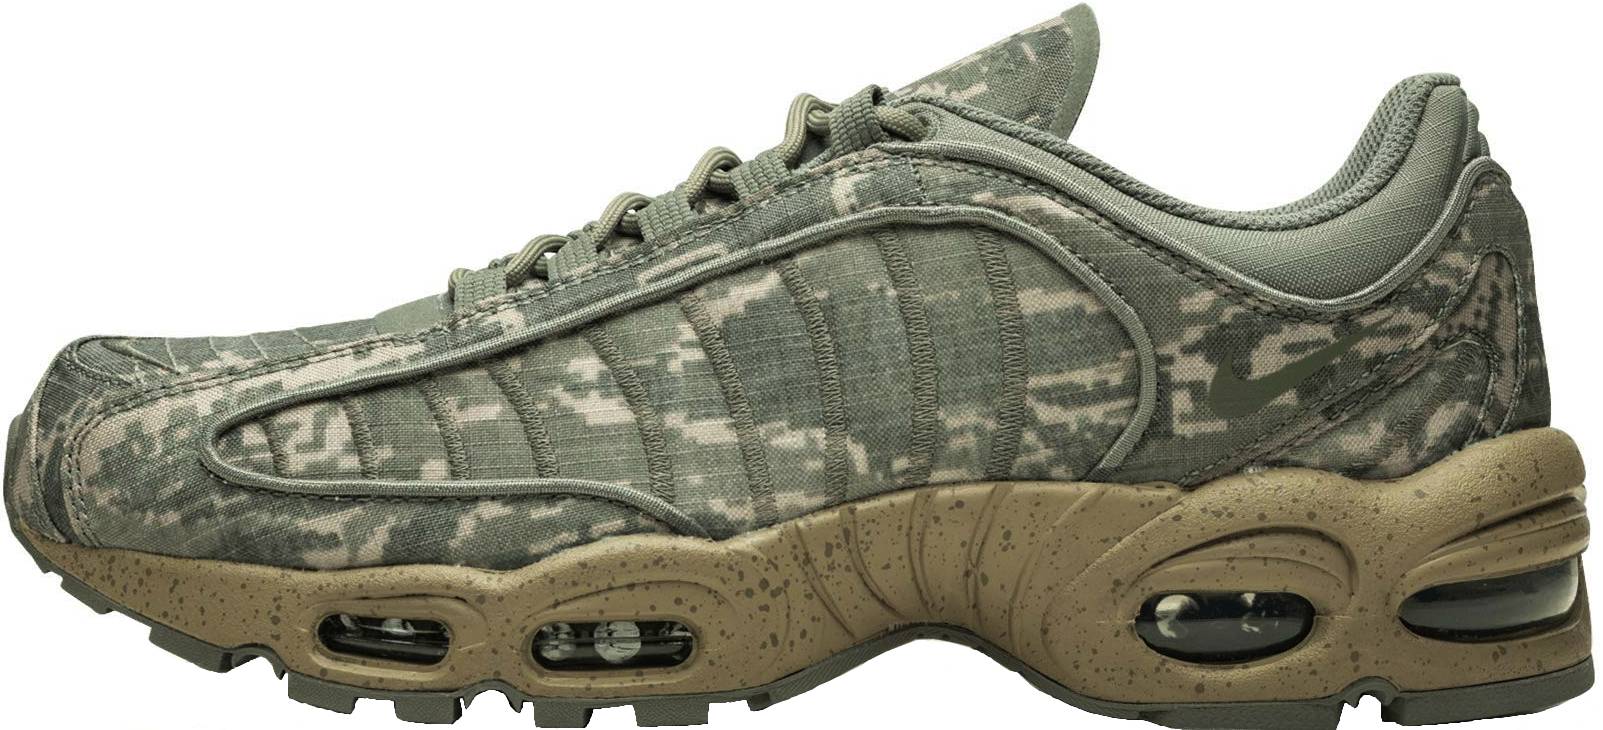 Nike Air Max Tailwind IV SP sneakers in 3 colors (only $129 